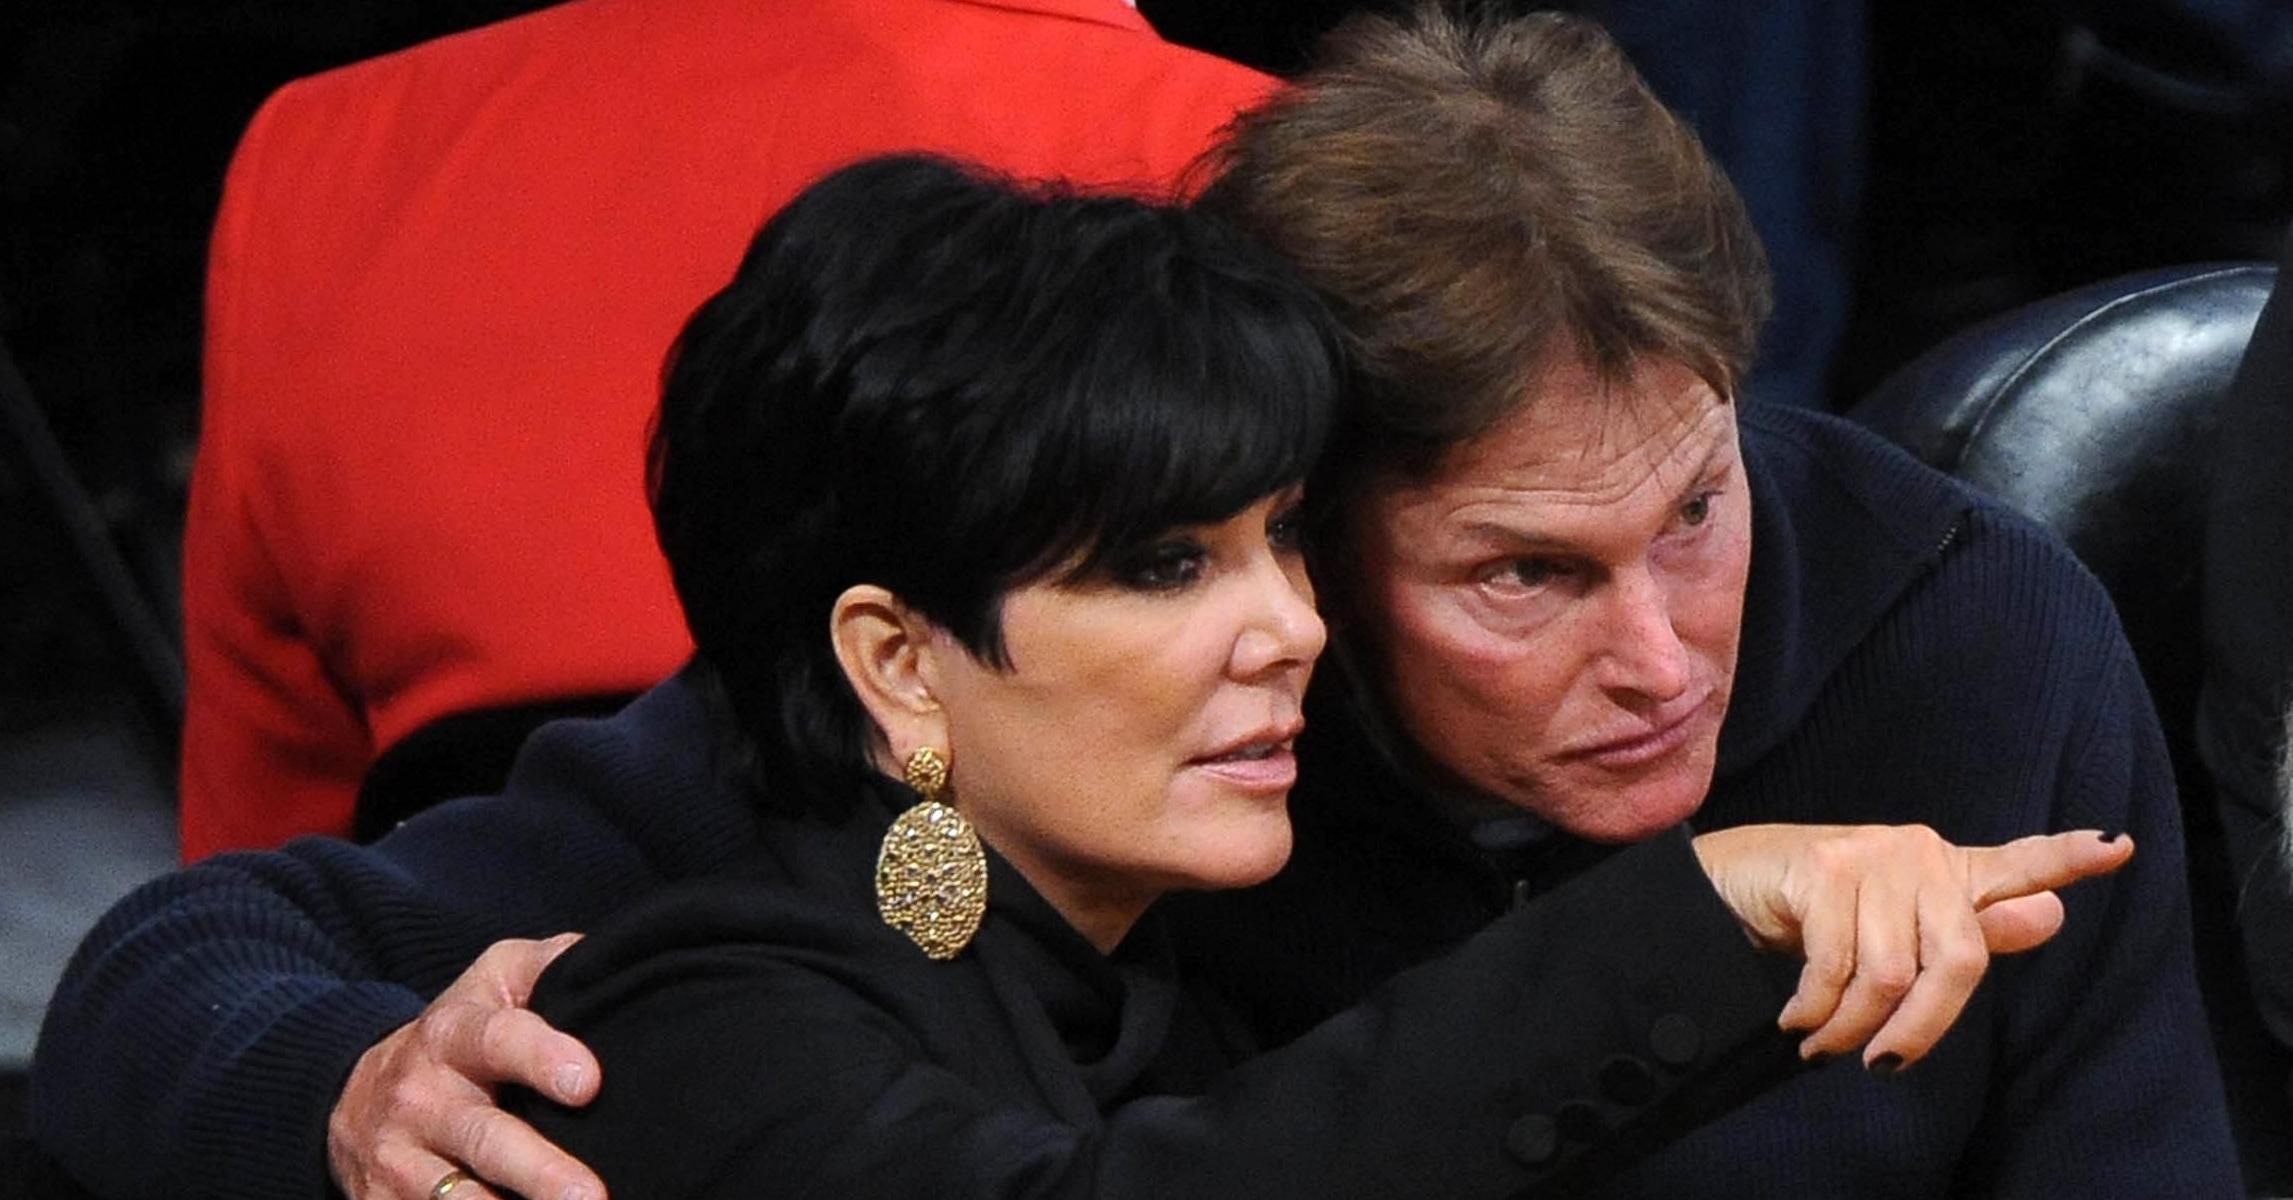 51 Hottest Kris Jenner Pictures Can Make You Fall For Her Glamorous Looks -  GEEKS ON COFFEE